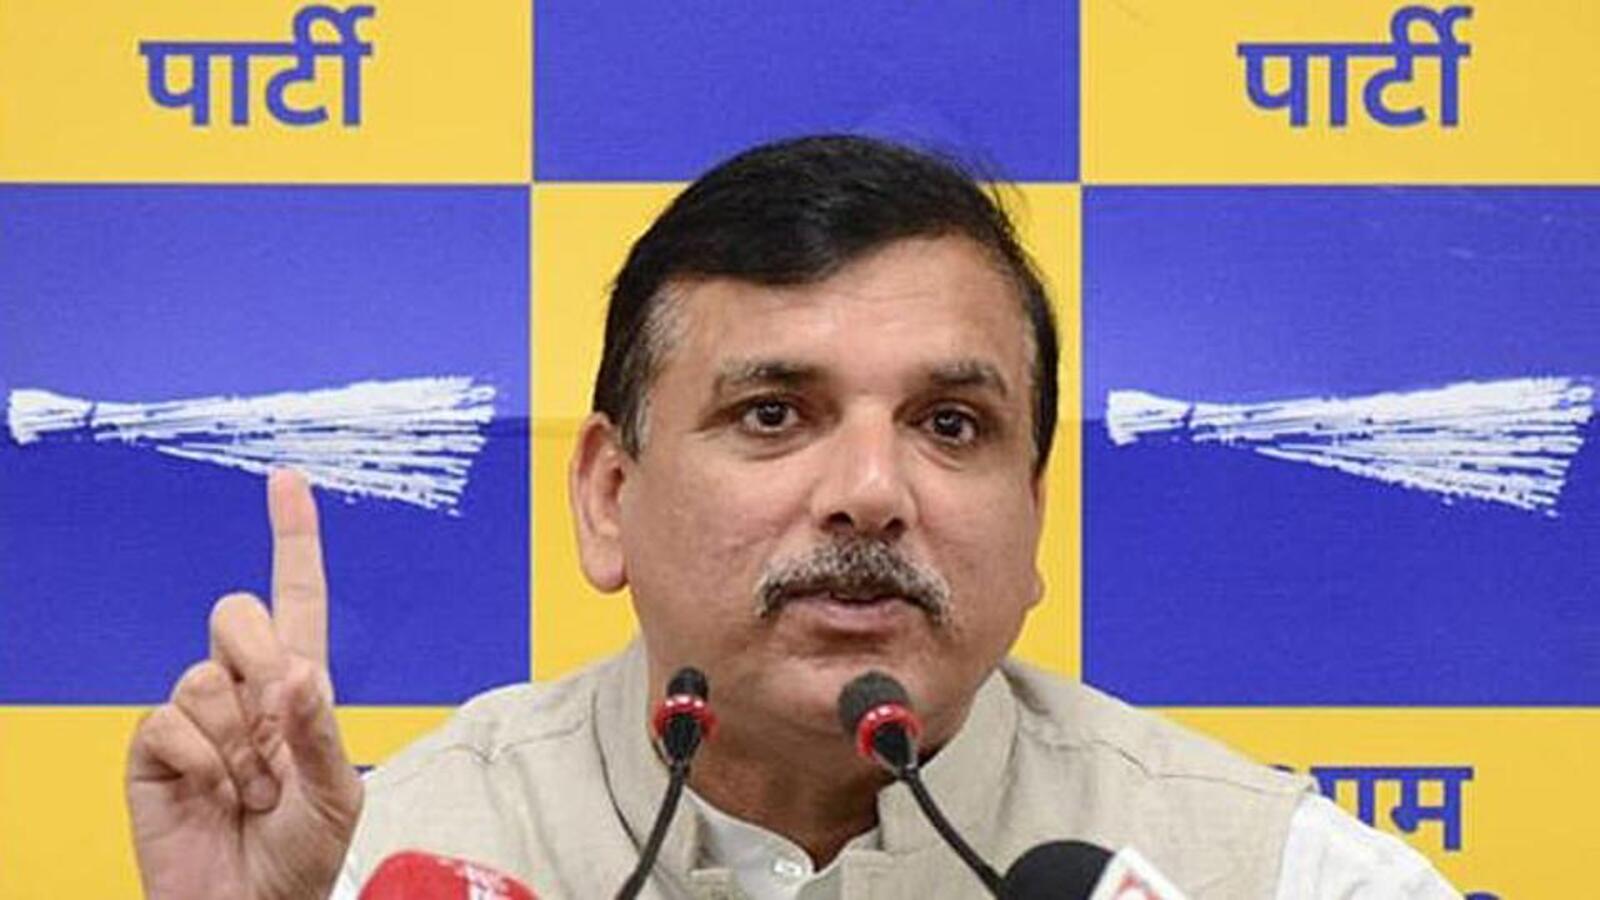 Sanjay Singh slams BJP for 'luring' Manish Sisodia to quit Aam Aadmi Party  | Latest News Delhi - Hindustan Times